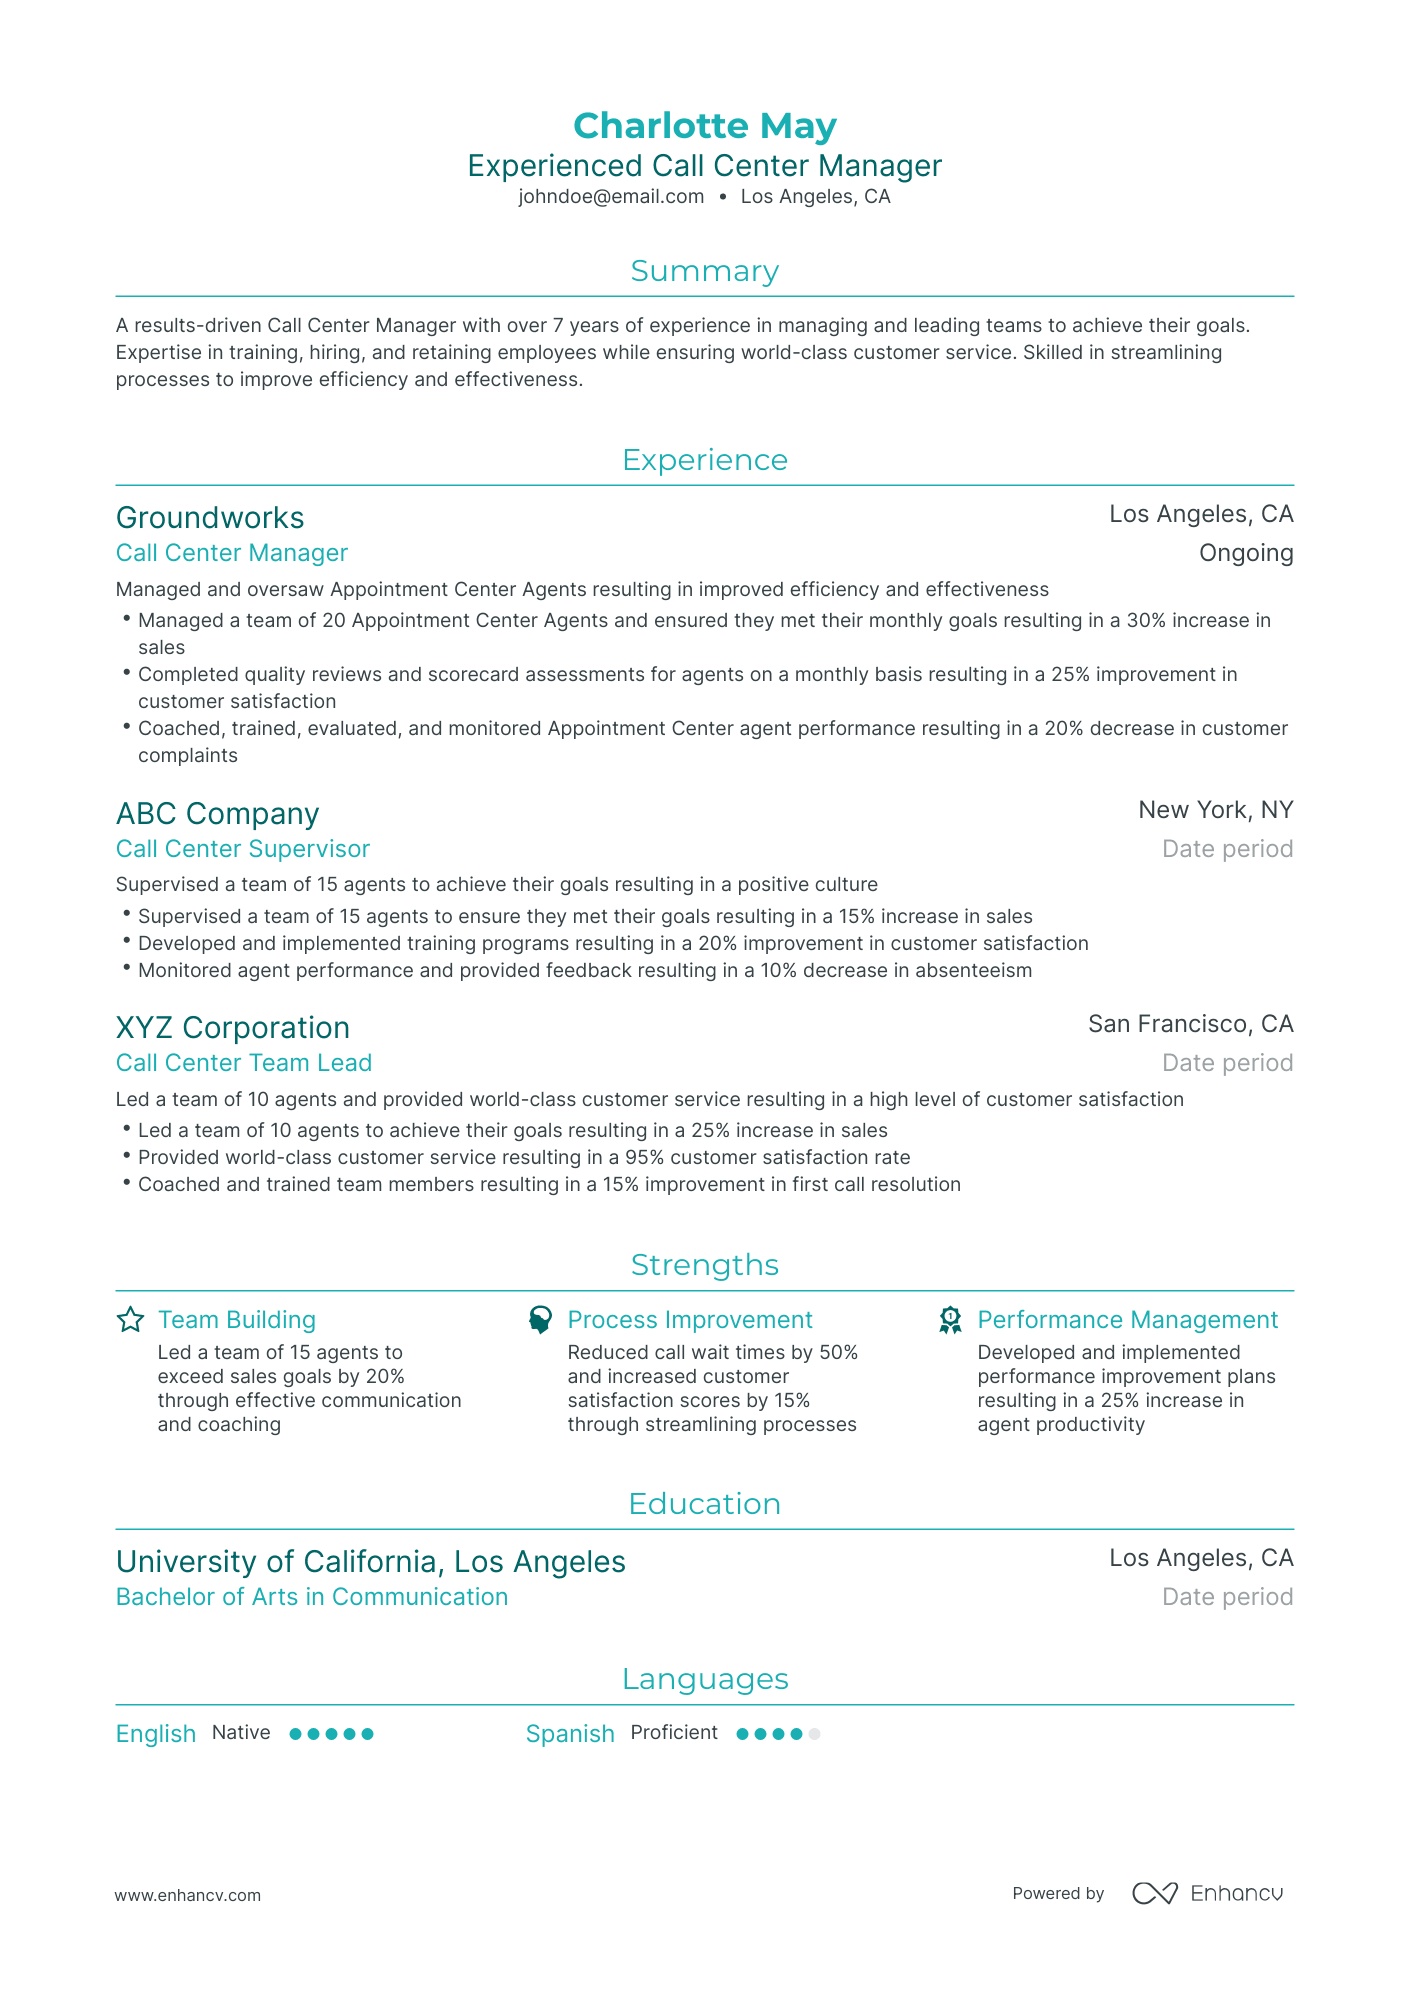 Traditional Call Center Manager Resume Template